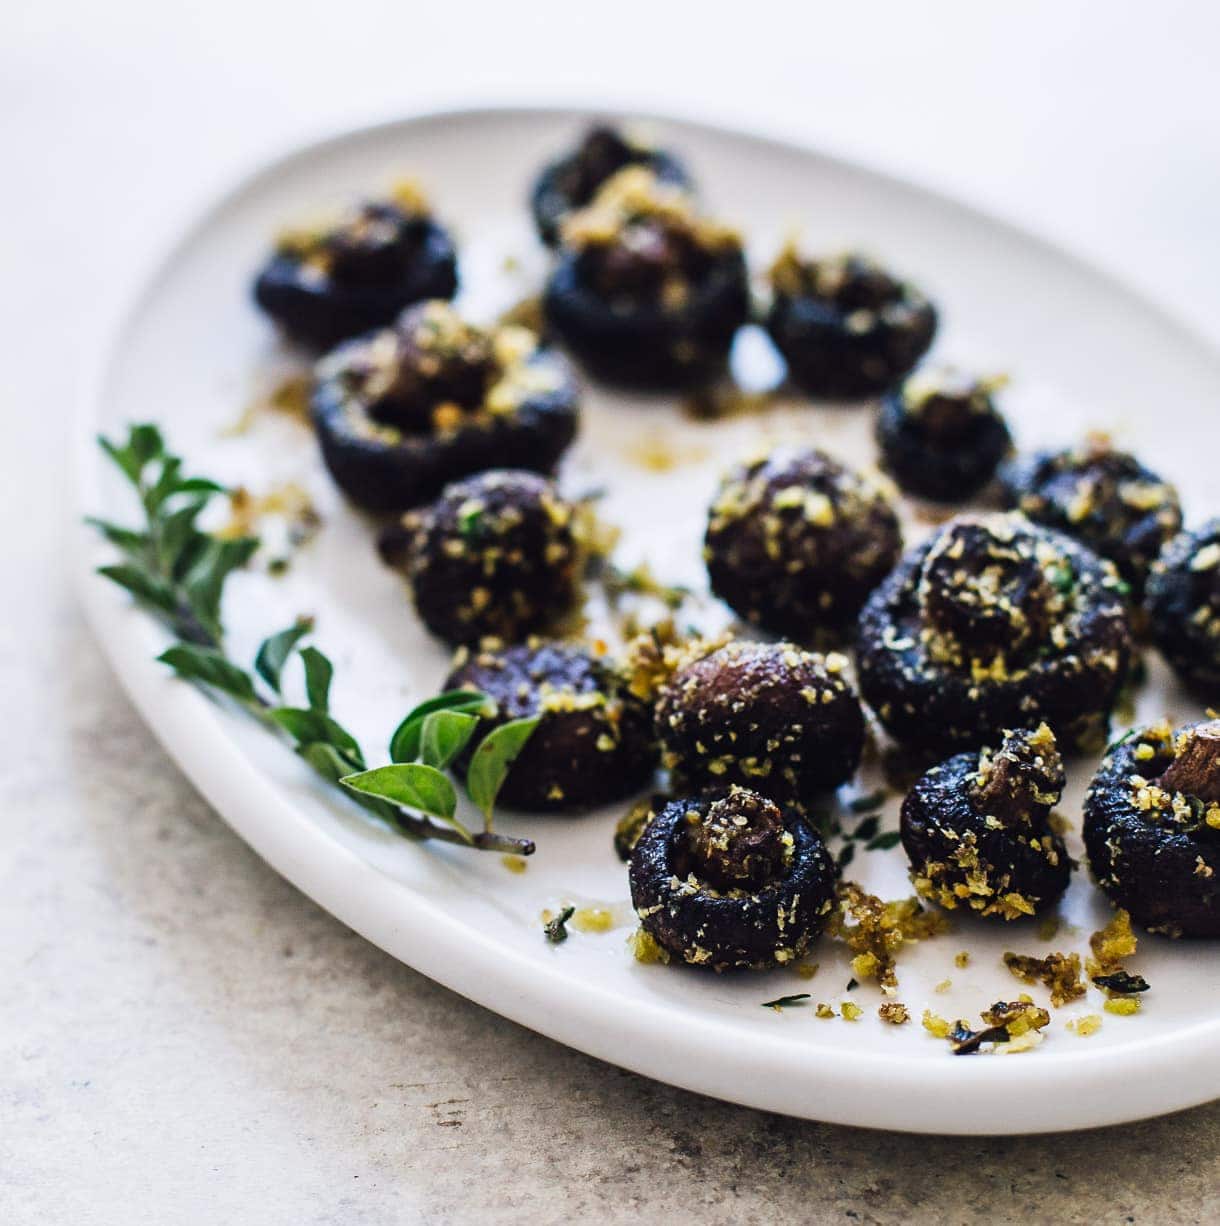 Oregano and Butter Roasted Mushrooms with Crispy Crumbs